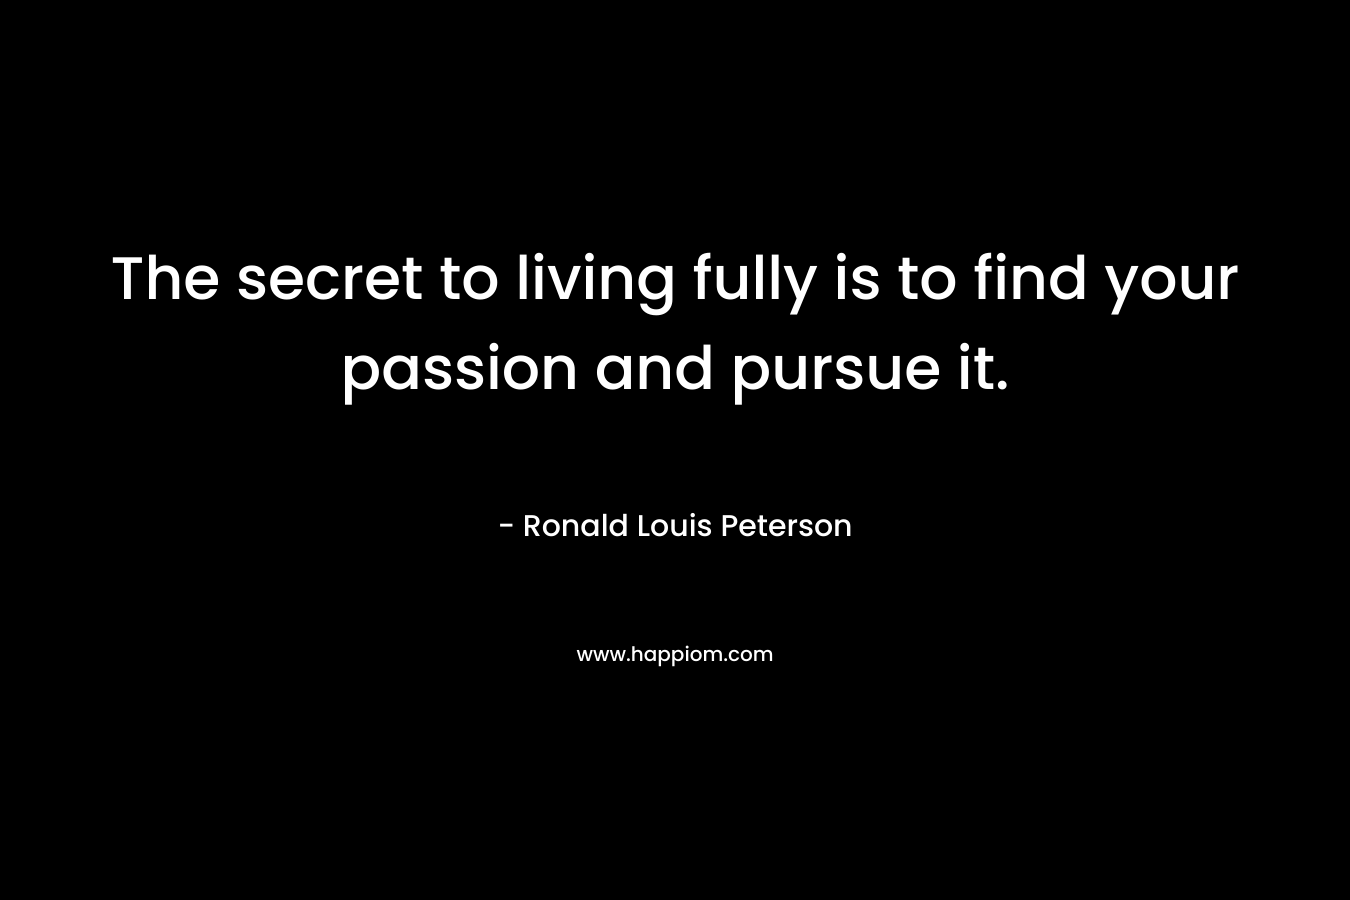 The secret to living fully is to find your passion and pursue it.